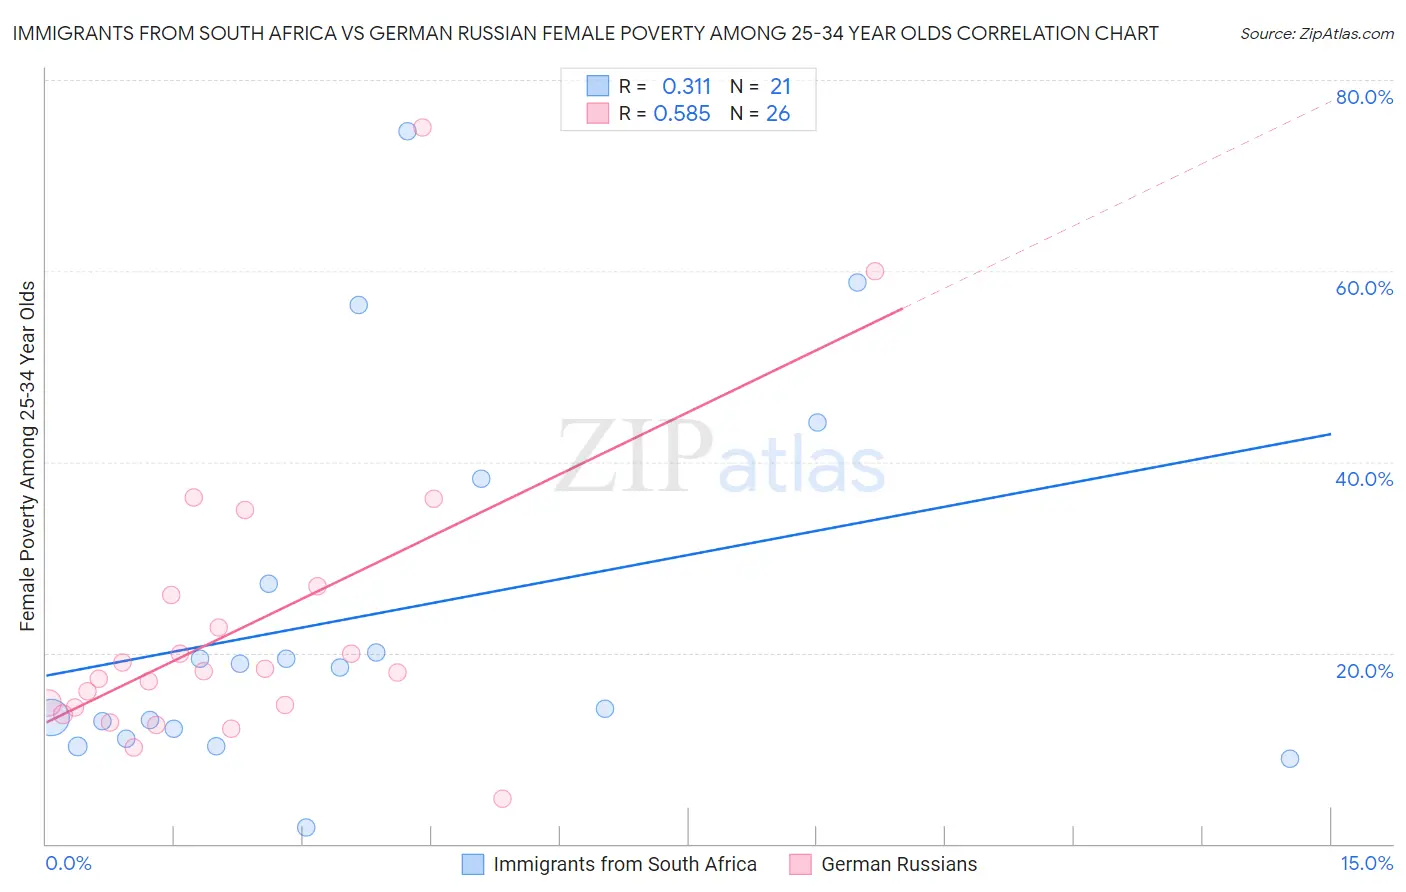 Immigrants from South Africa vs German Russian Female Poverty Among 25-34 Year Olds